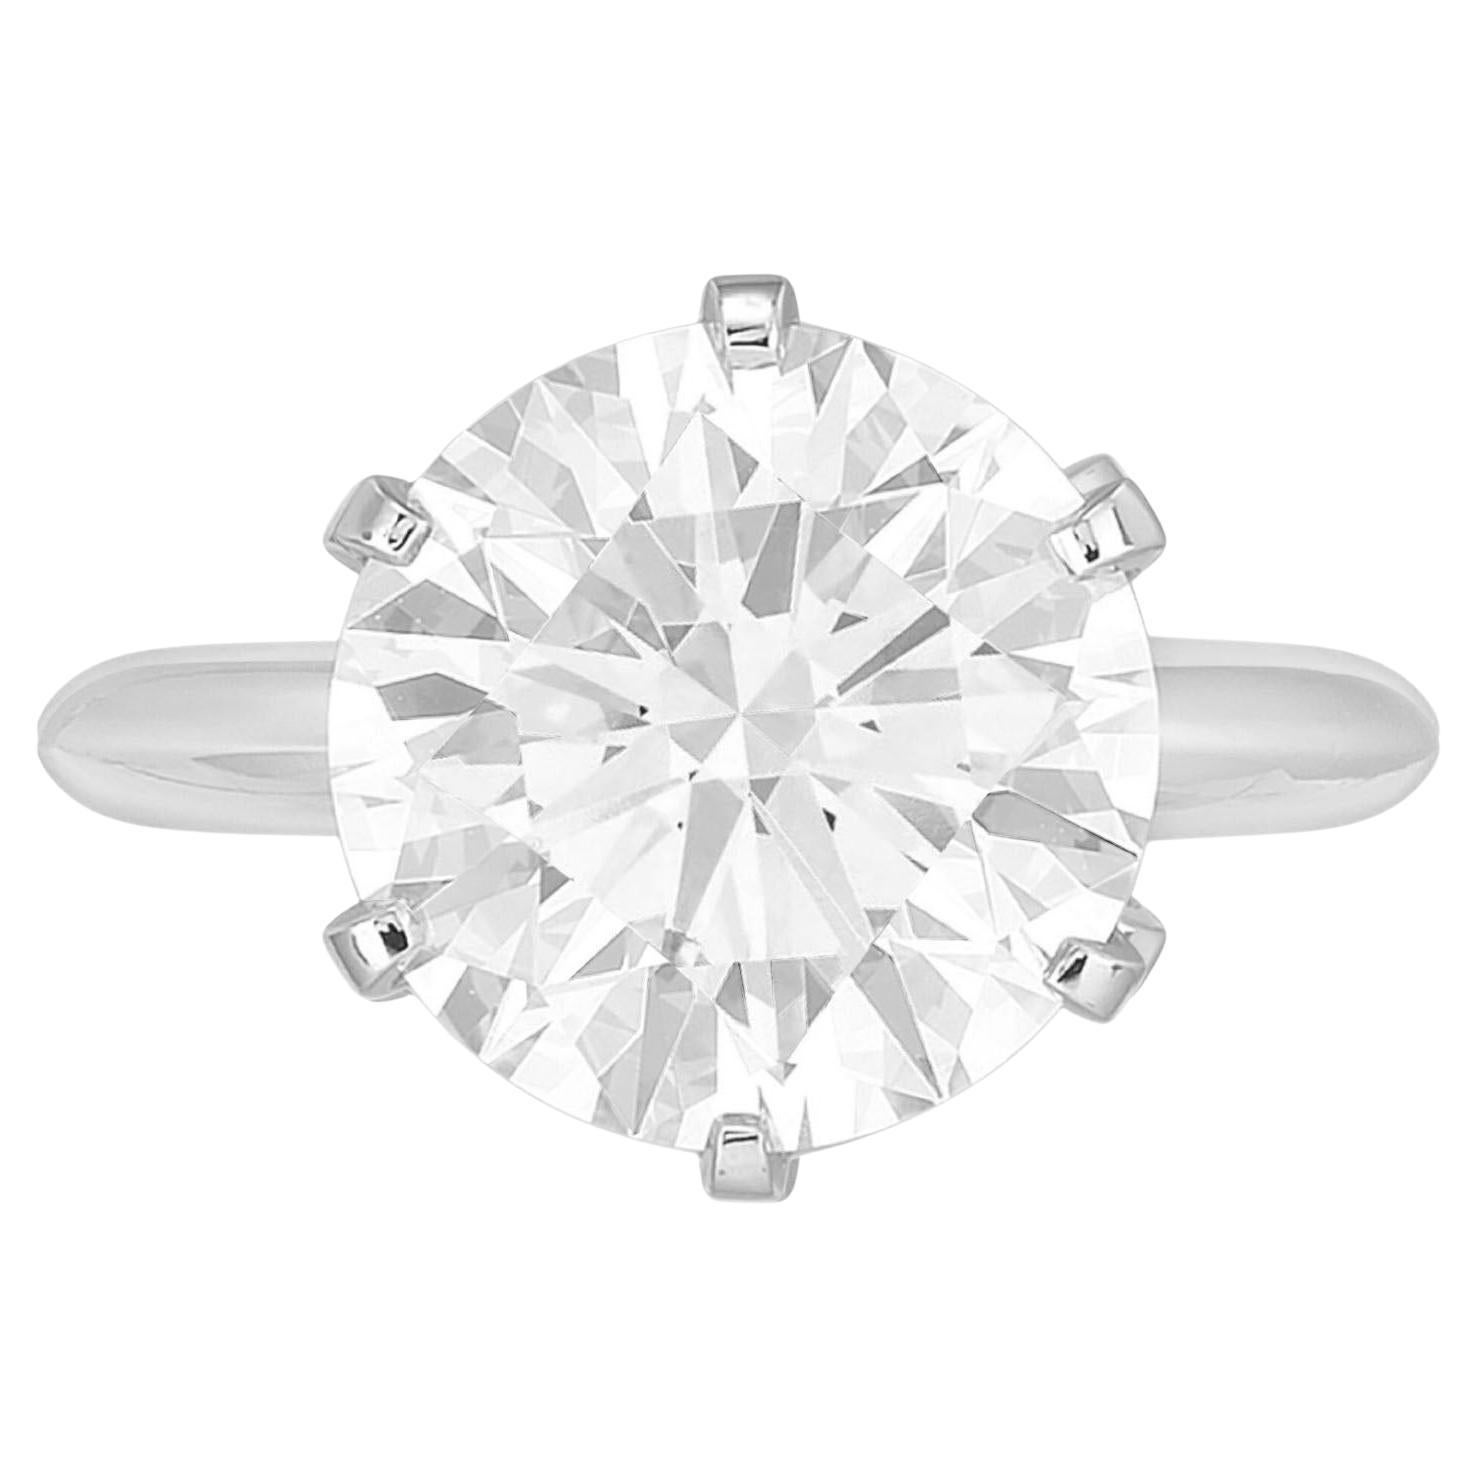 Adorn yourself with the timeless elegance of this GIA certified 5.02 carat round diamond solitaire ring, a breathtaking symbol of everlasting beauty and sophistication. The centerpiece of this exquisite ring is a captivating 5.02 carat round